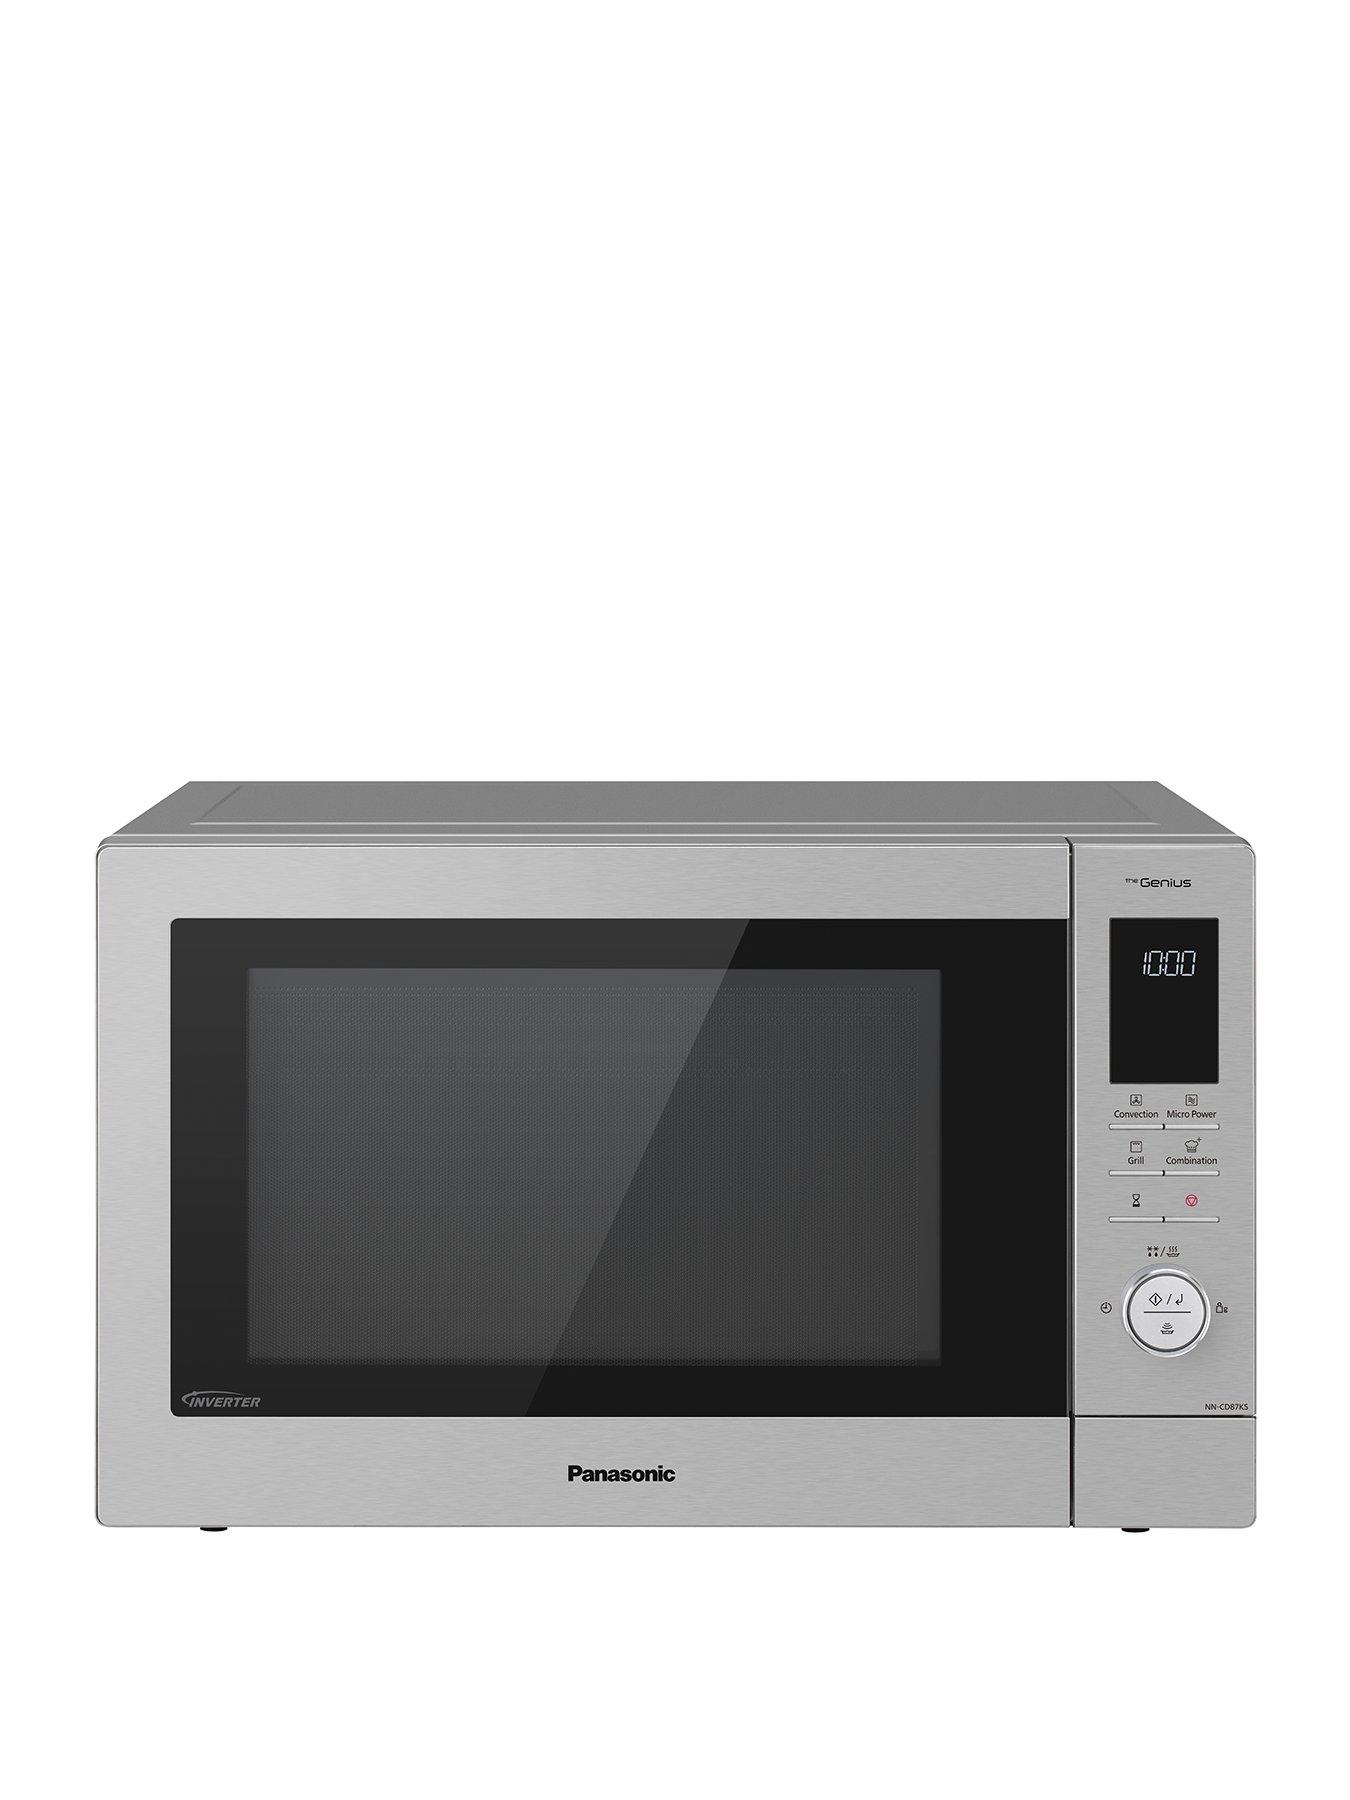 Cheap Microwaves, Nationwide Delivery